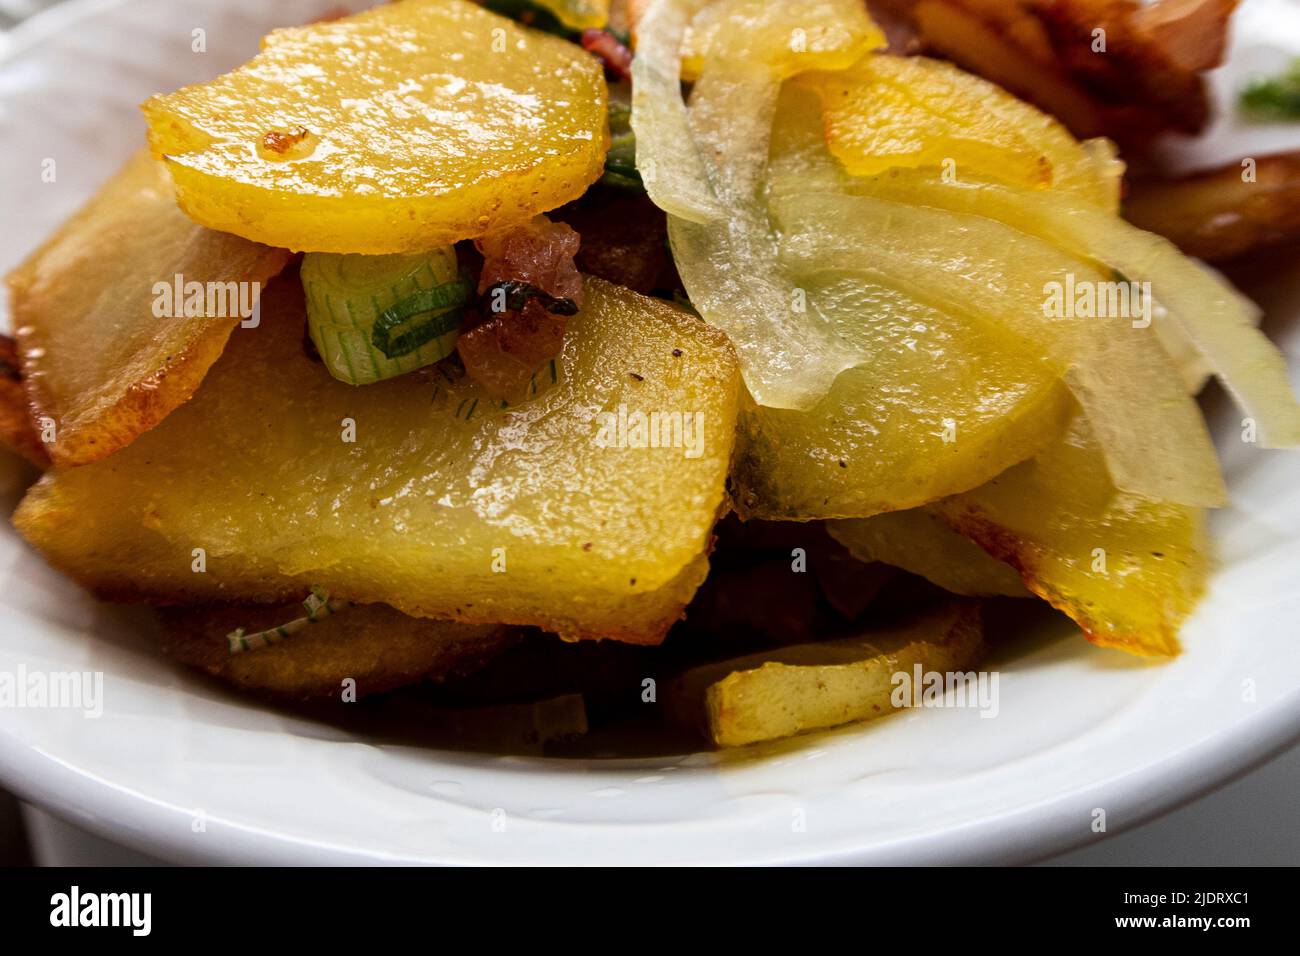 Close-up of delicious, golden yellow fried fried potatoes with bacon and onions Stock Photo